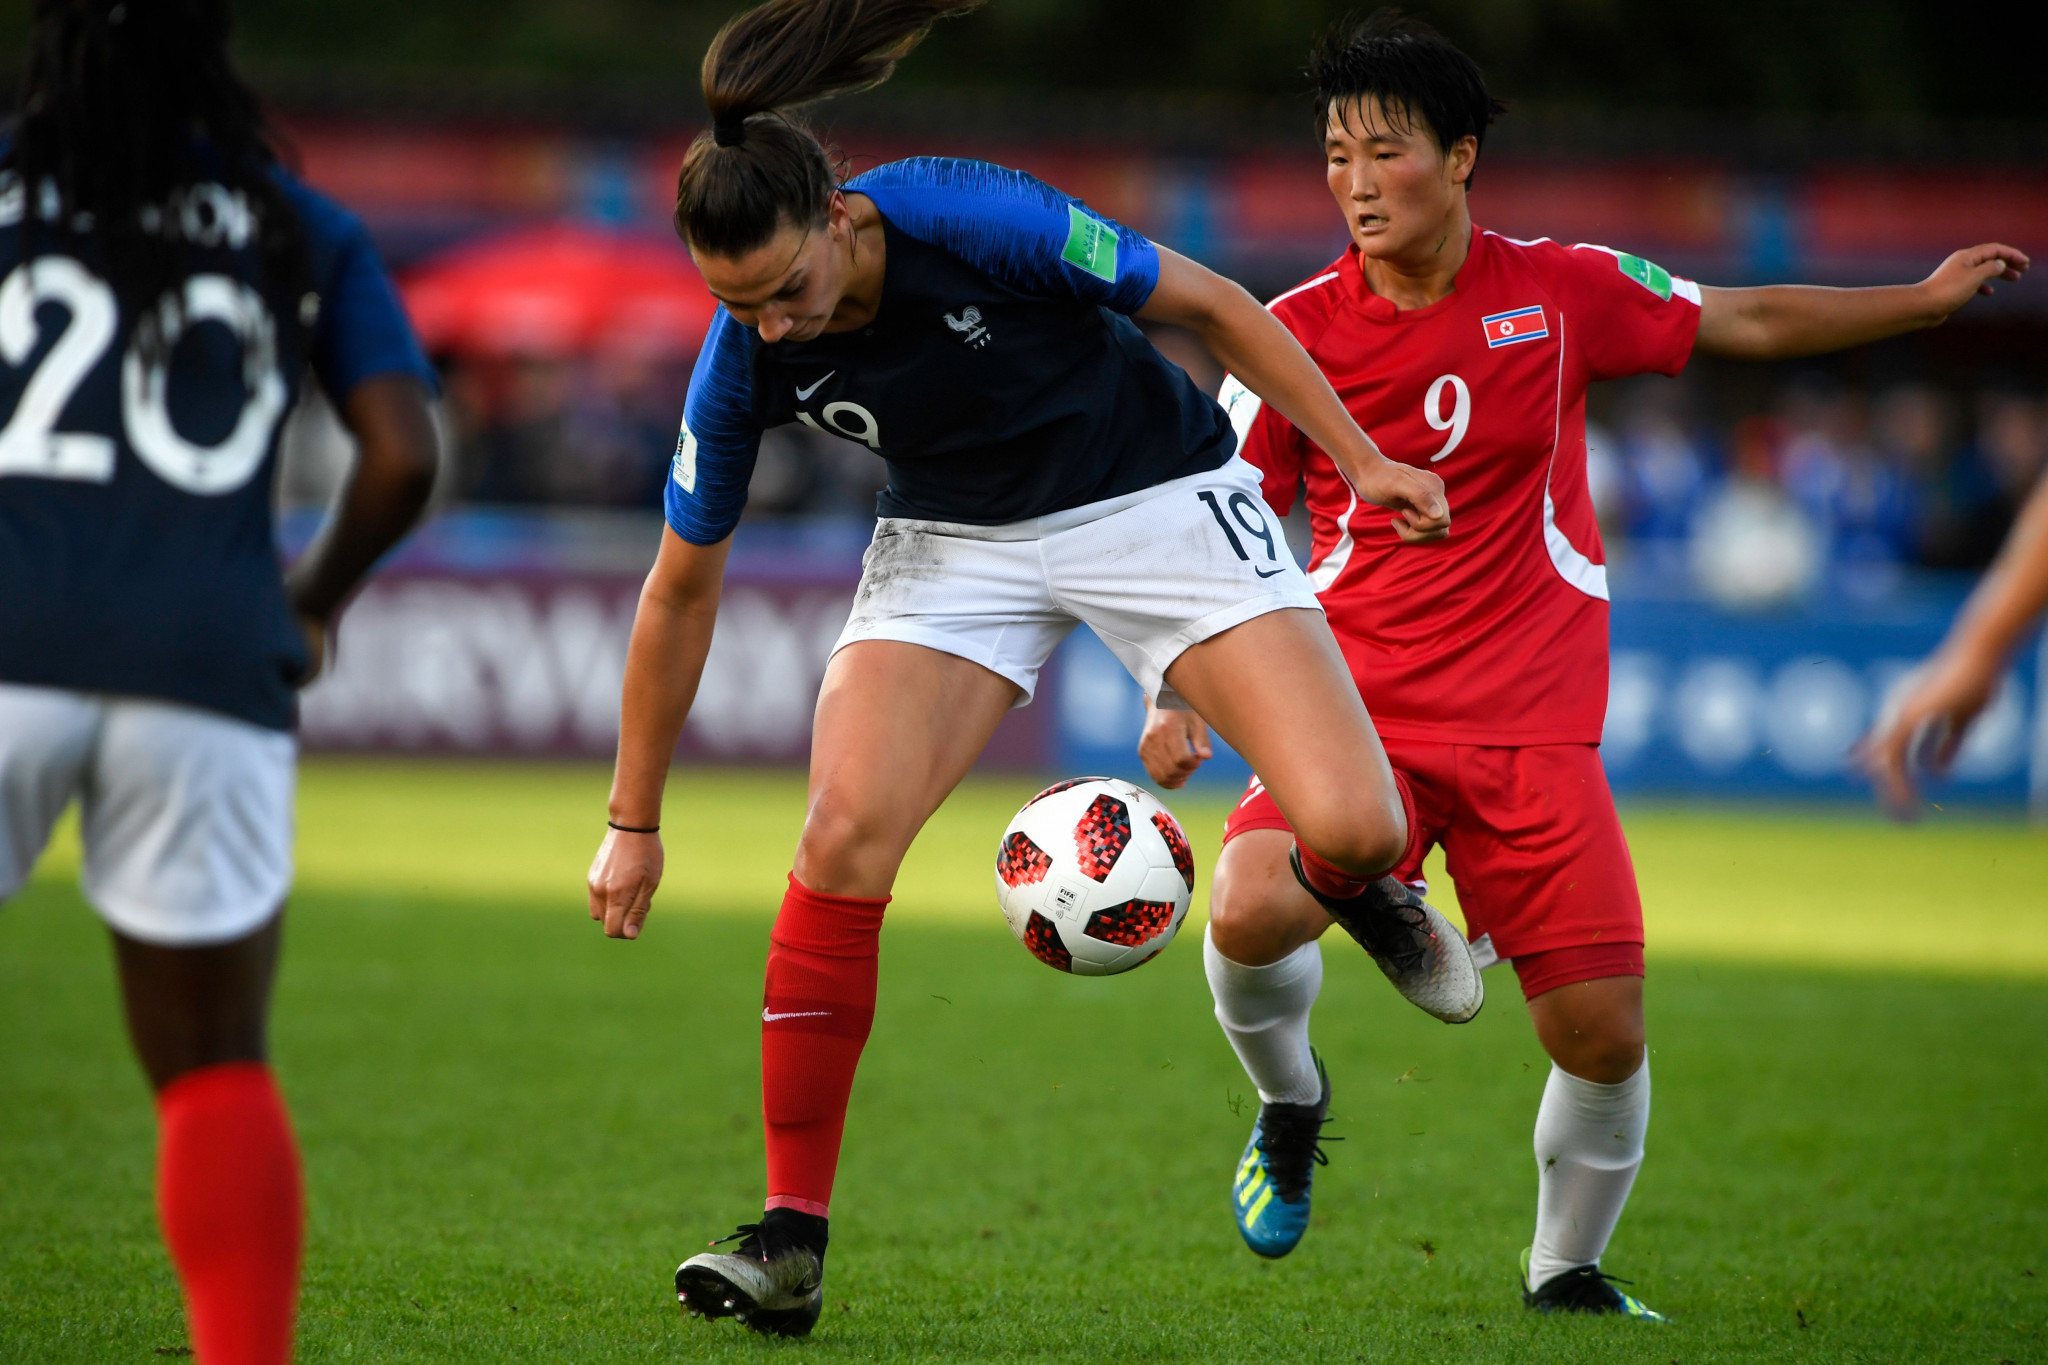 France reach FIFA Under20 Women's World Cup semifinals with victory